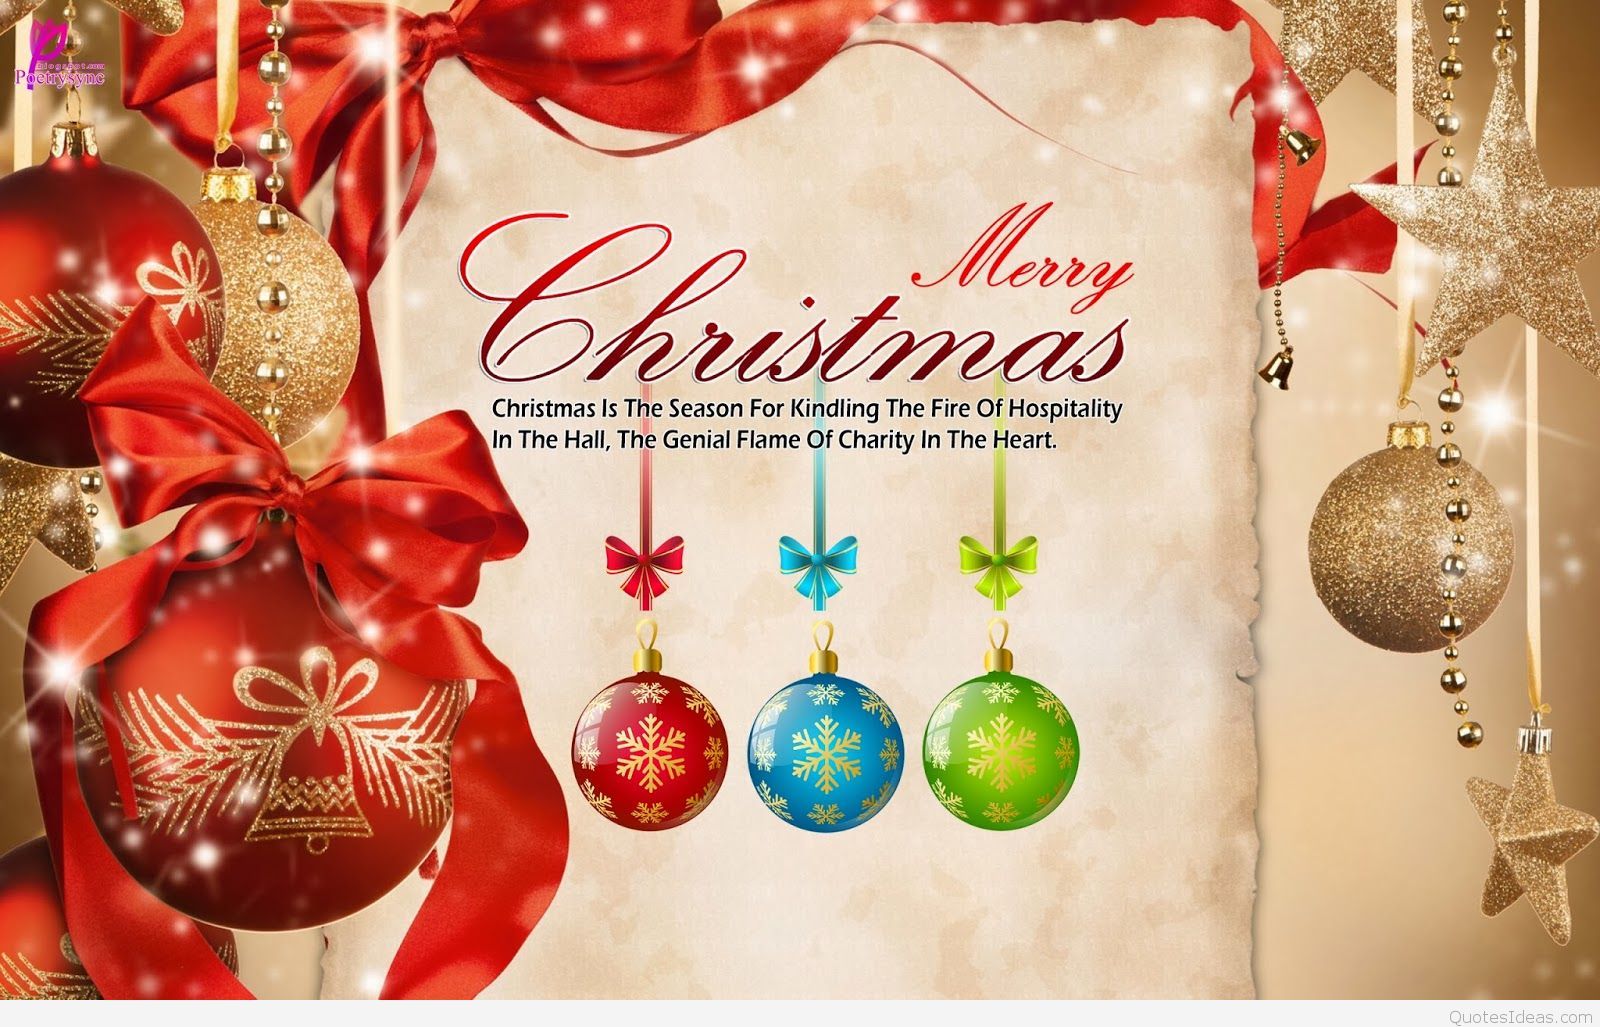 Merry Christmas wishes quotes, sayings and image 2015 2016